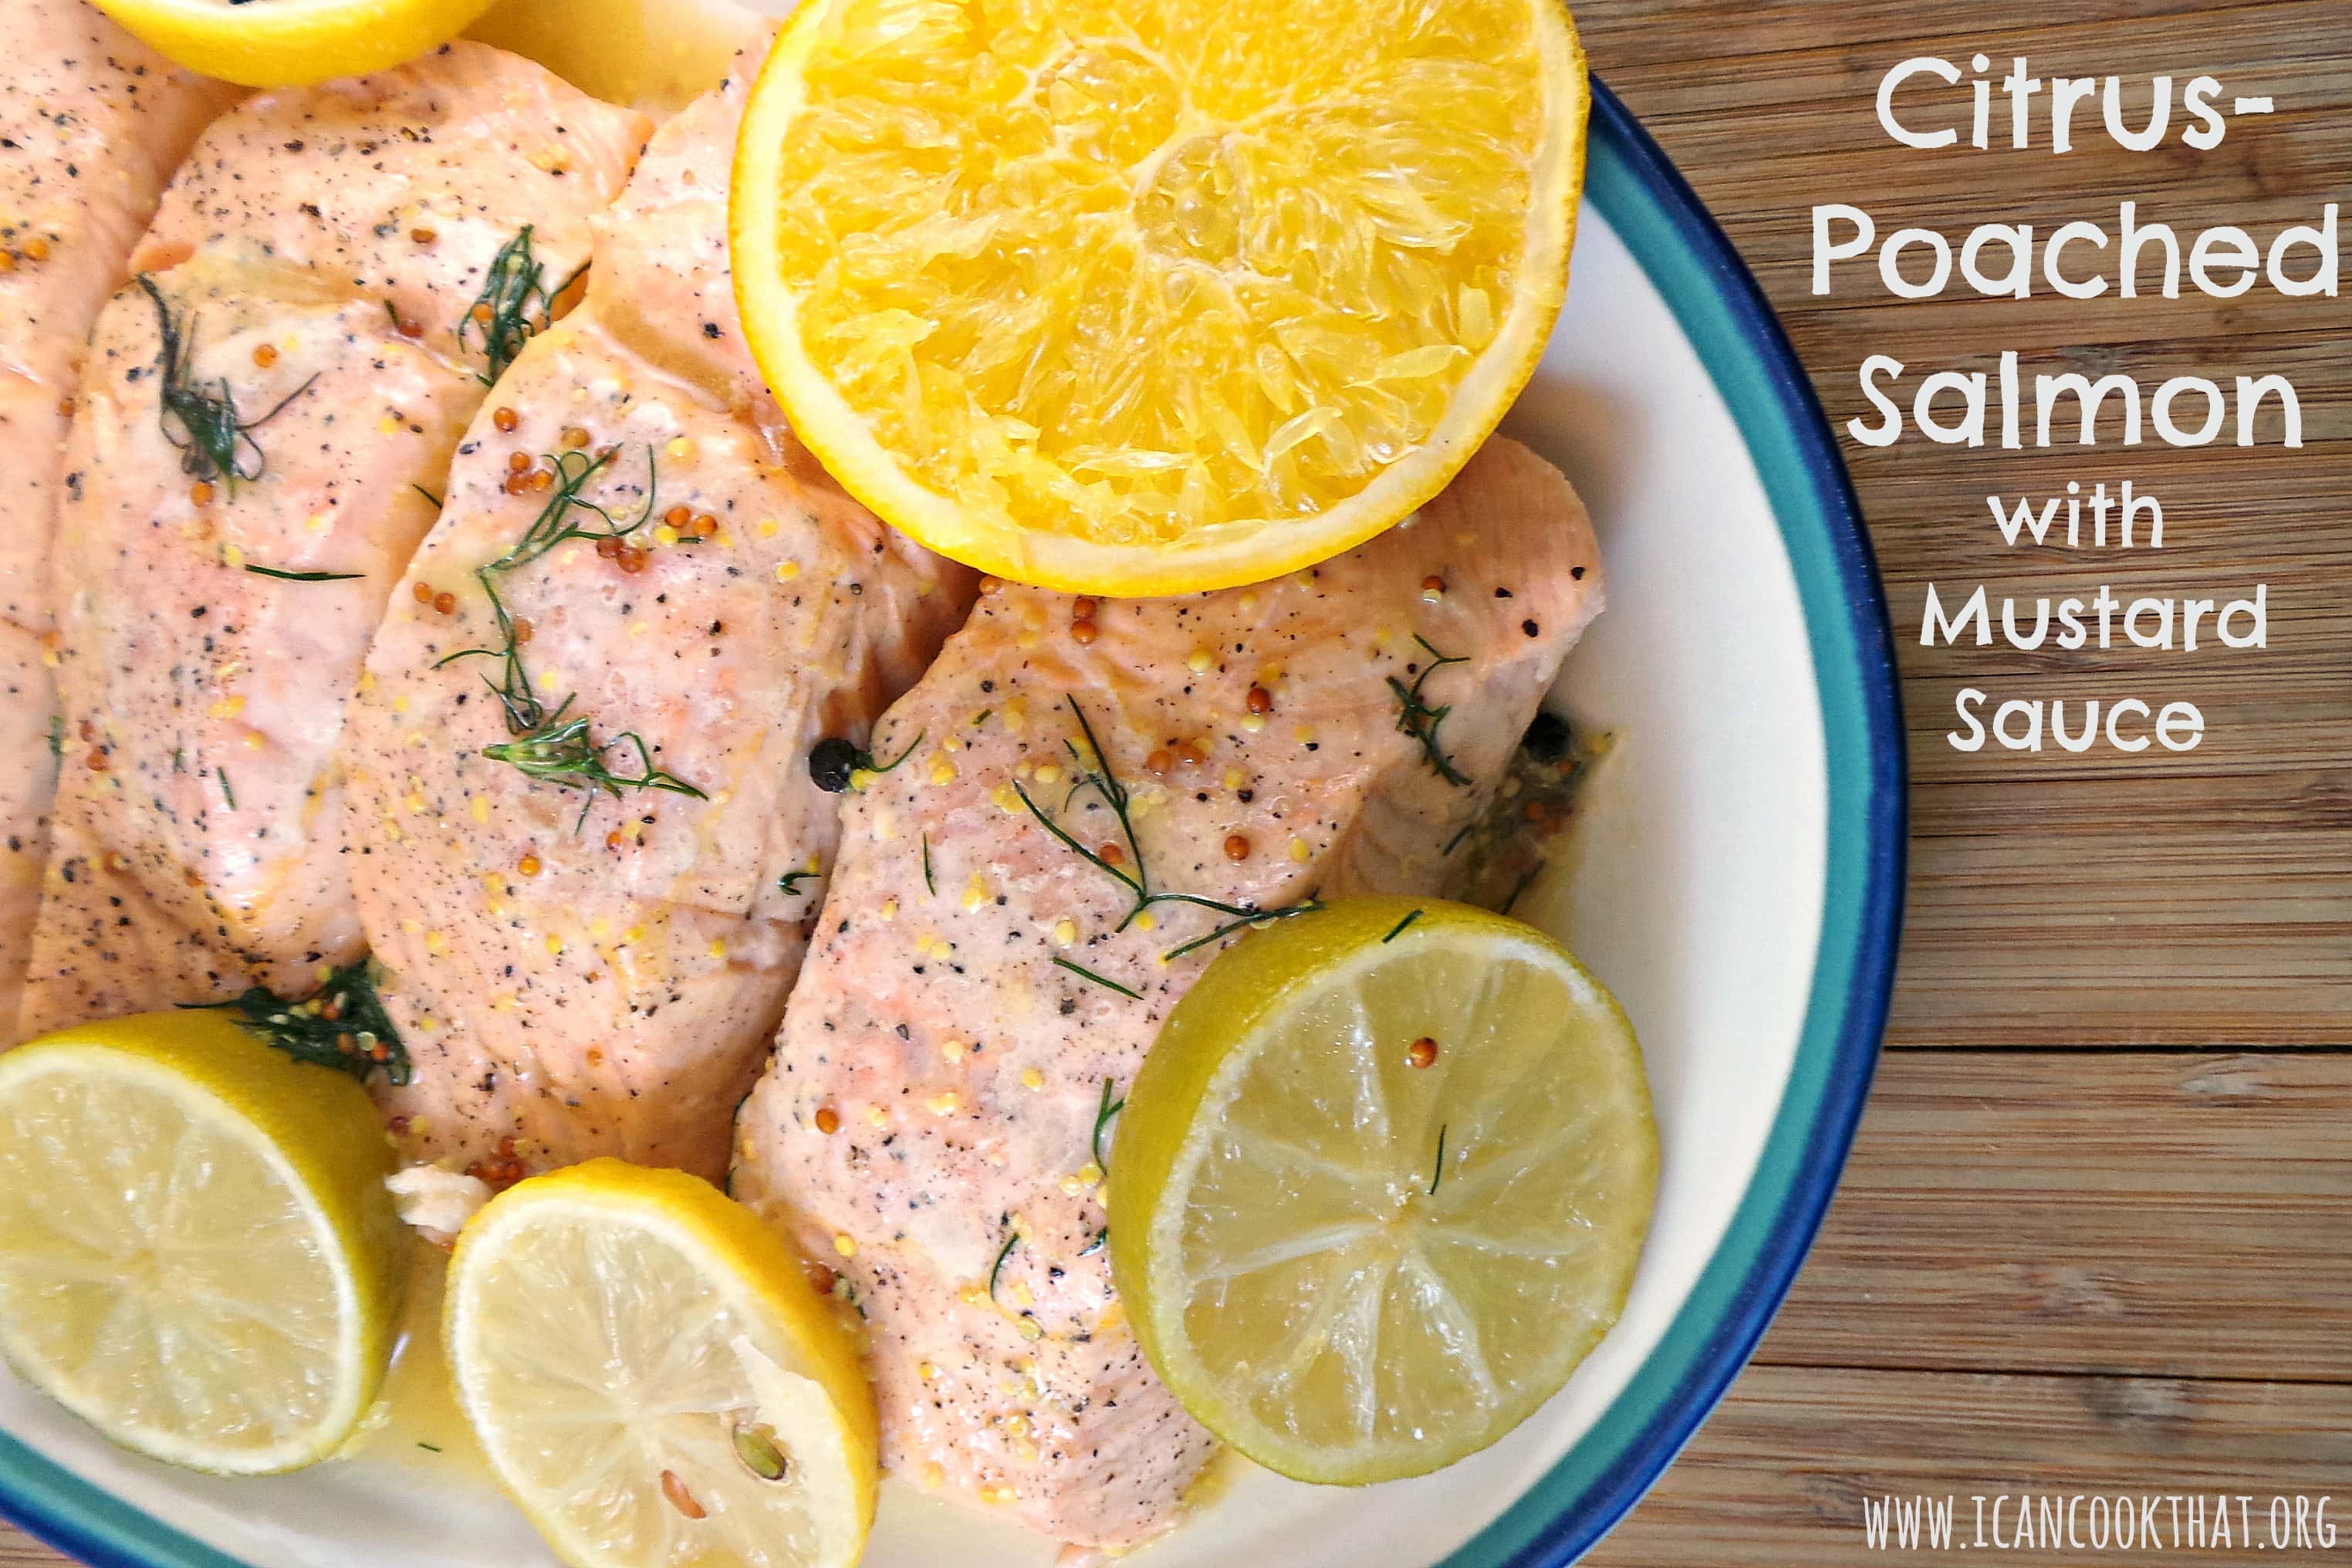 Citrus-Poached Salmon with Mustard Sauce